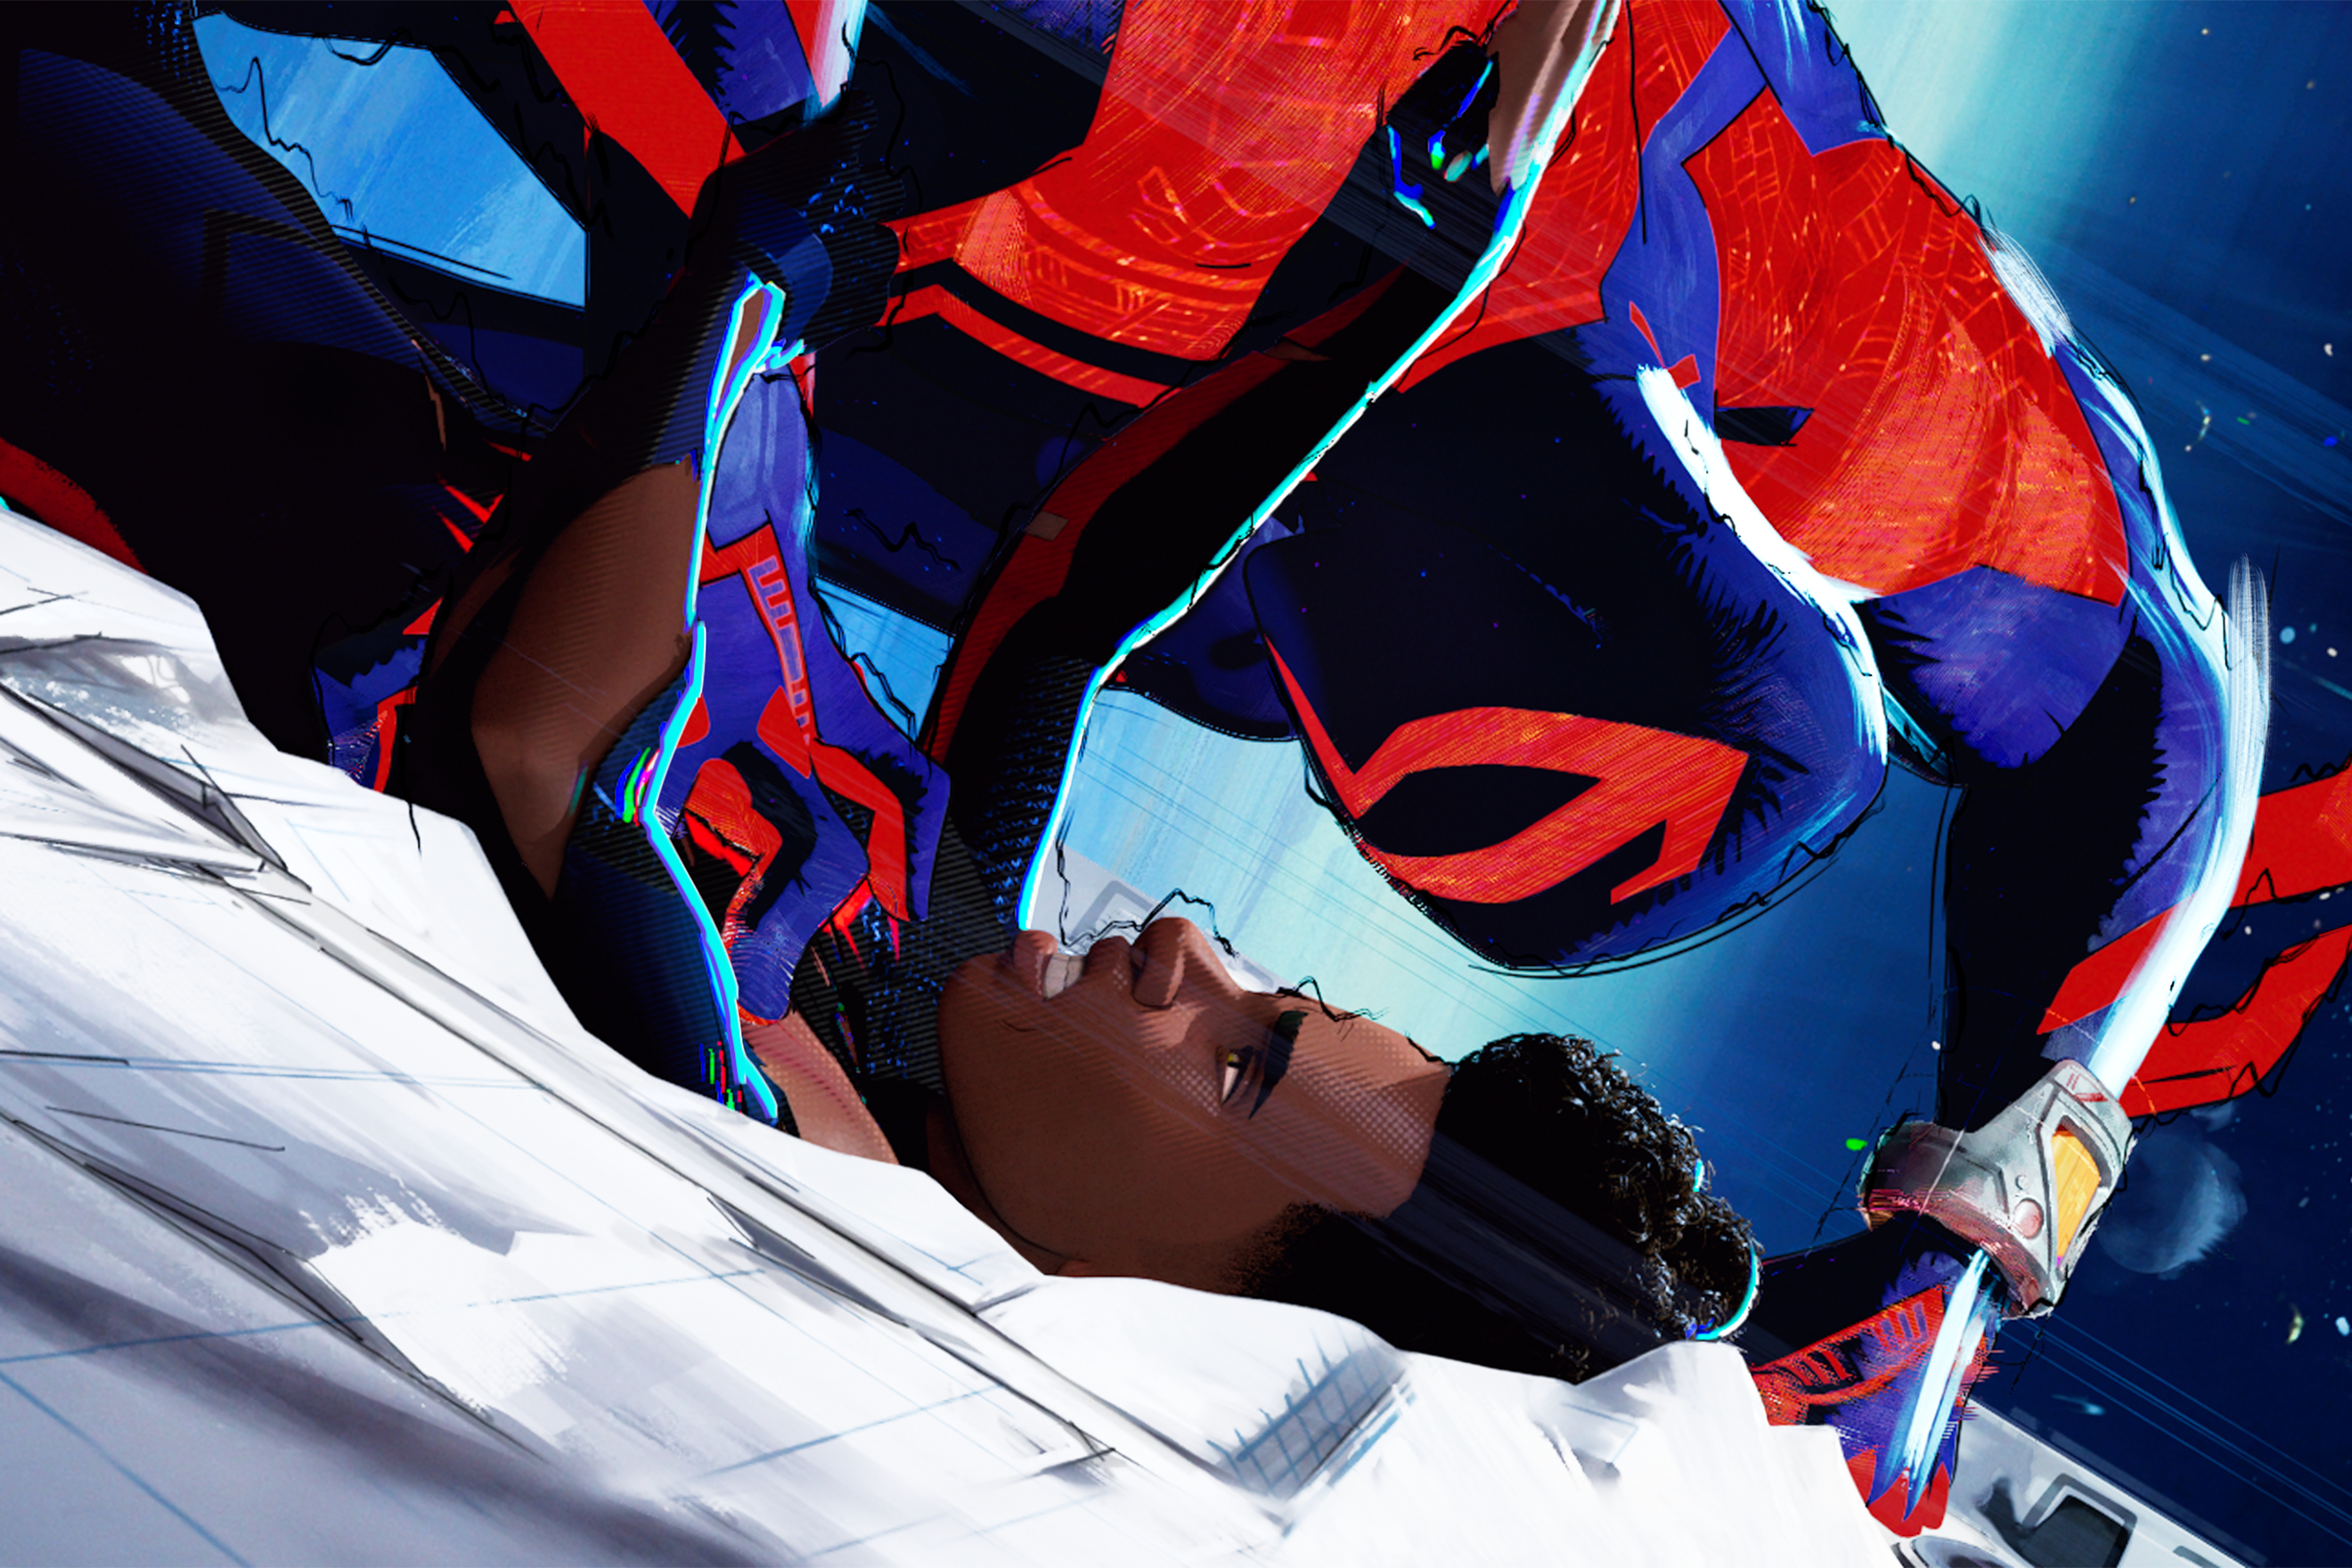 New 'Spider-Verse' Clips, Posters Spotlight the Spider Society